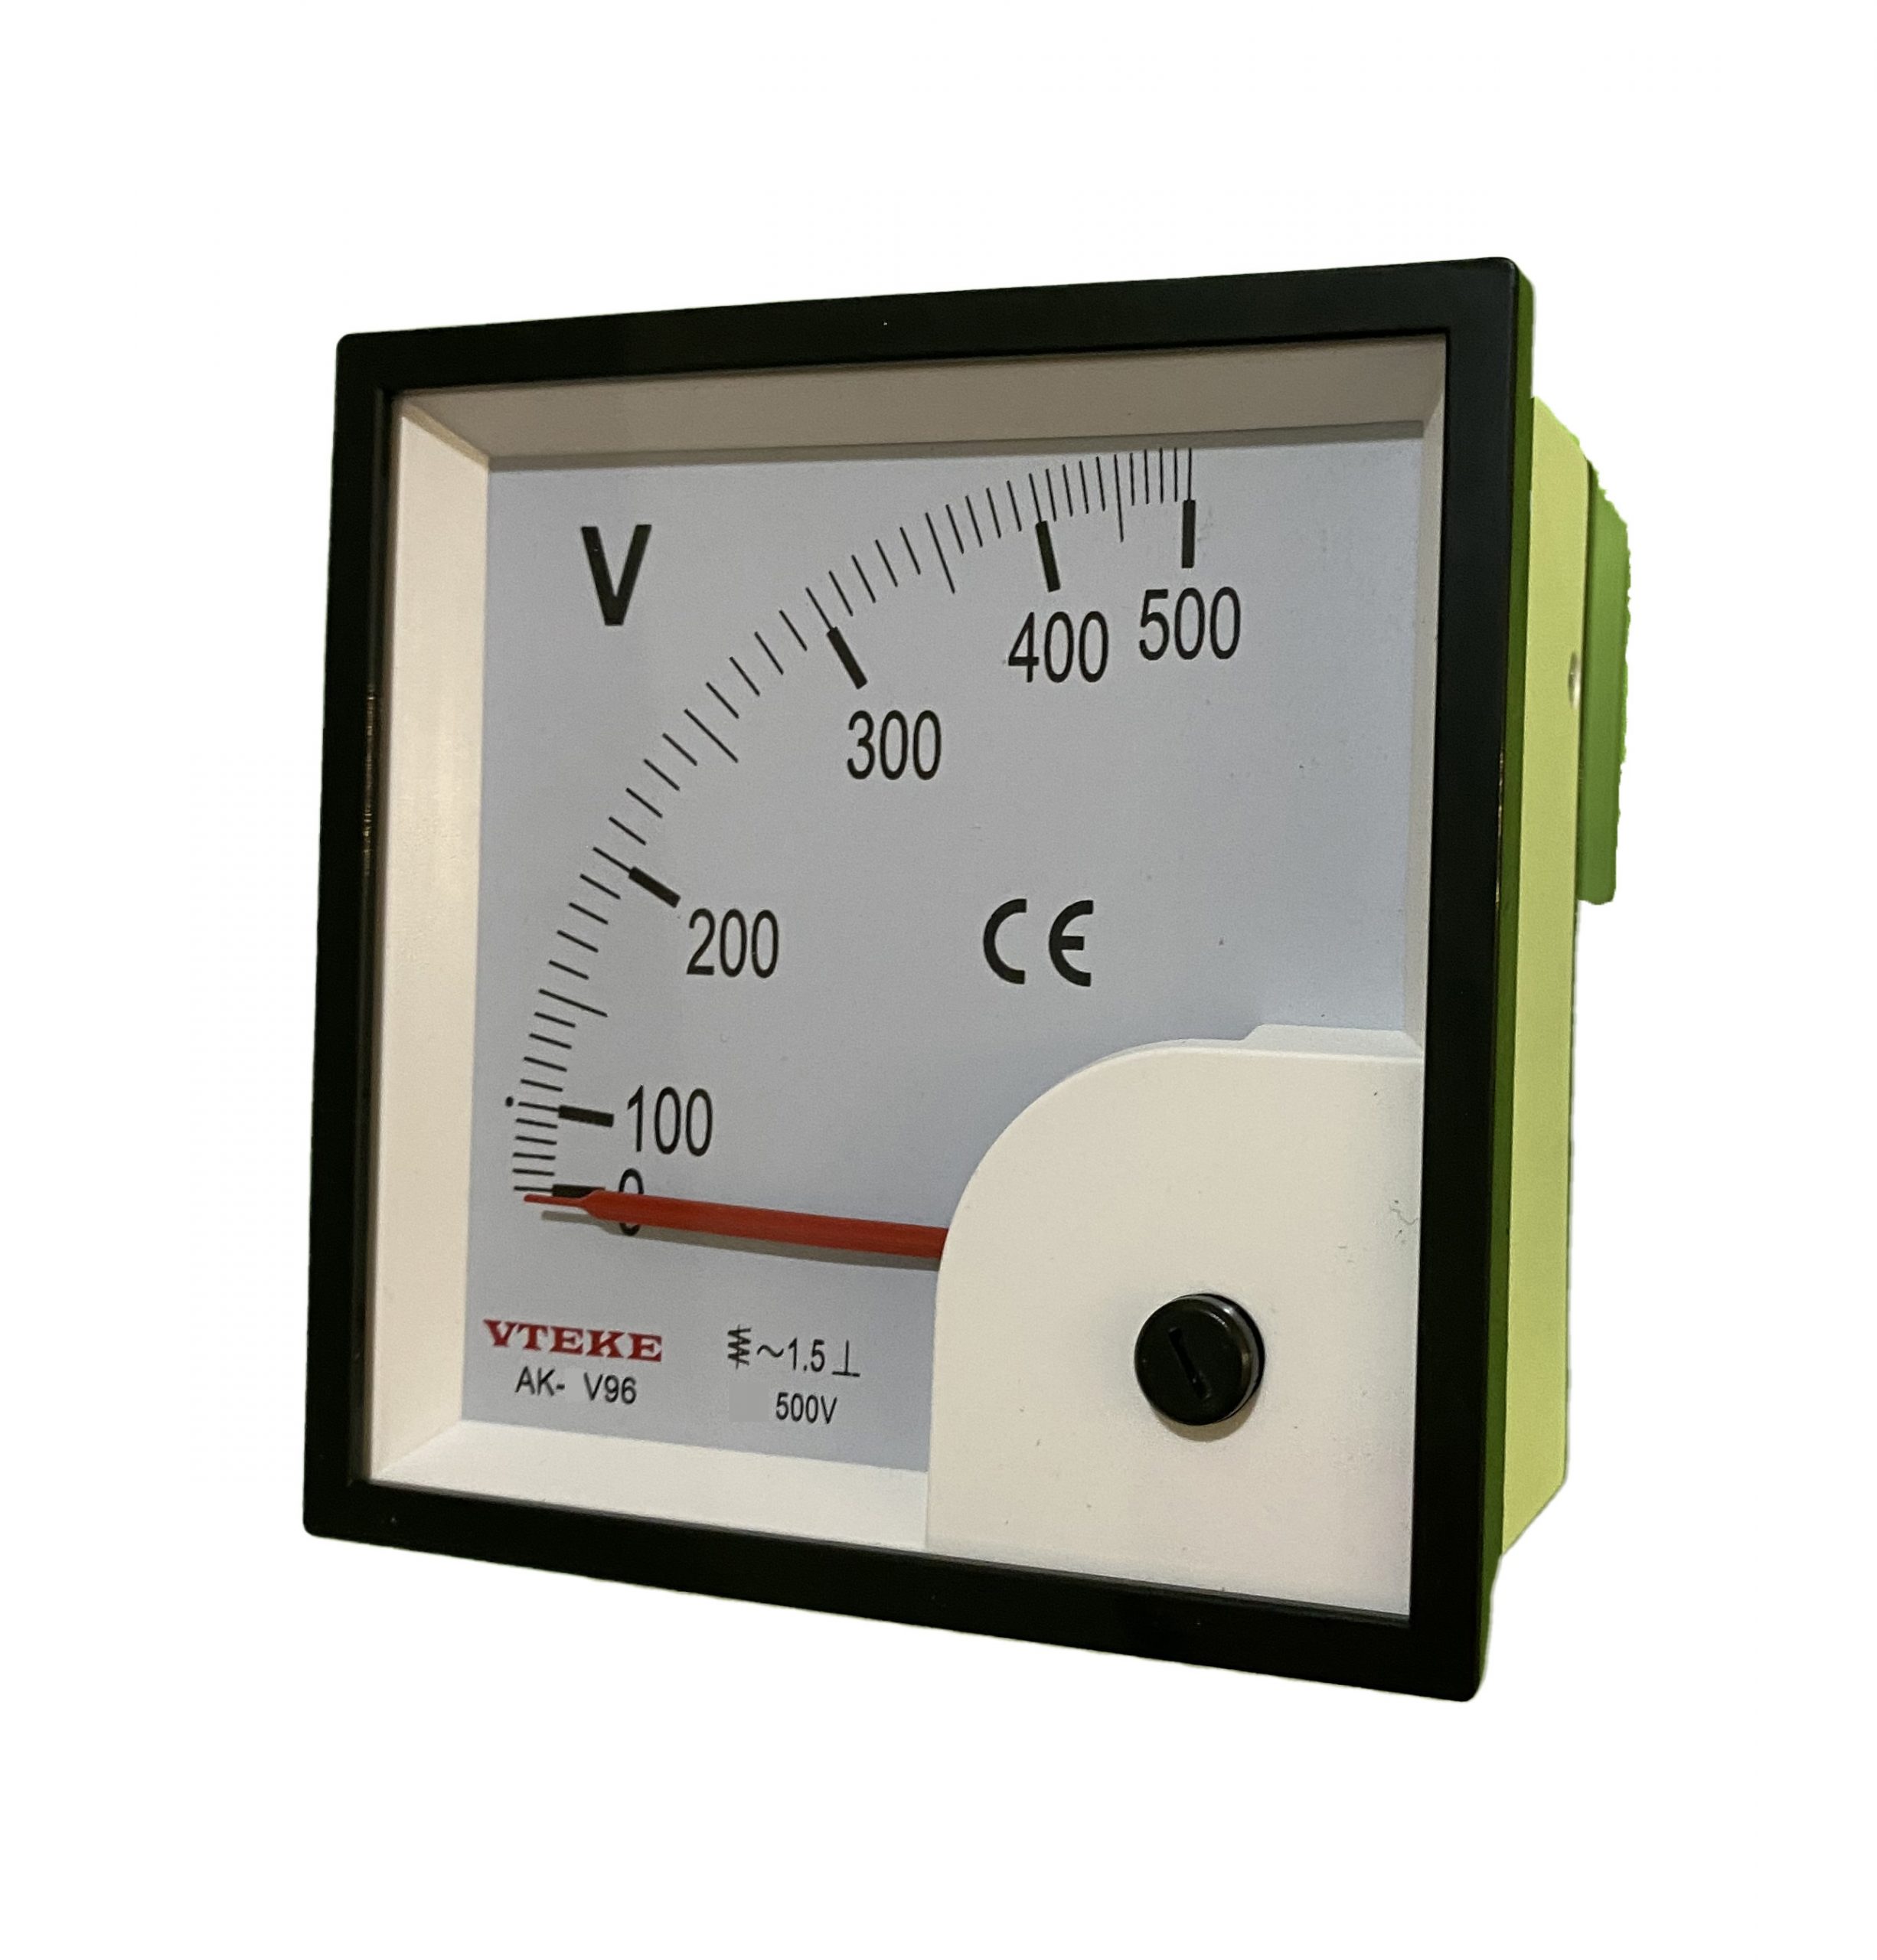 Analog voltmeter, How to measure voltage using an analogue voltmeter